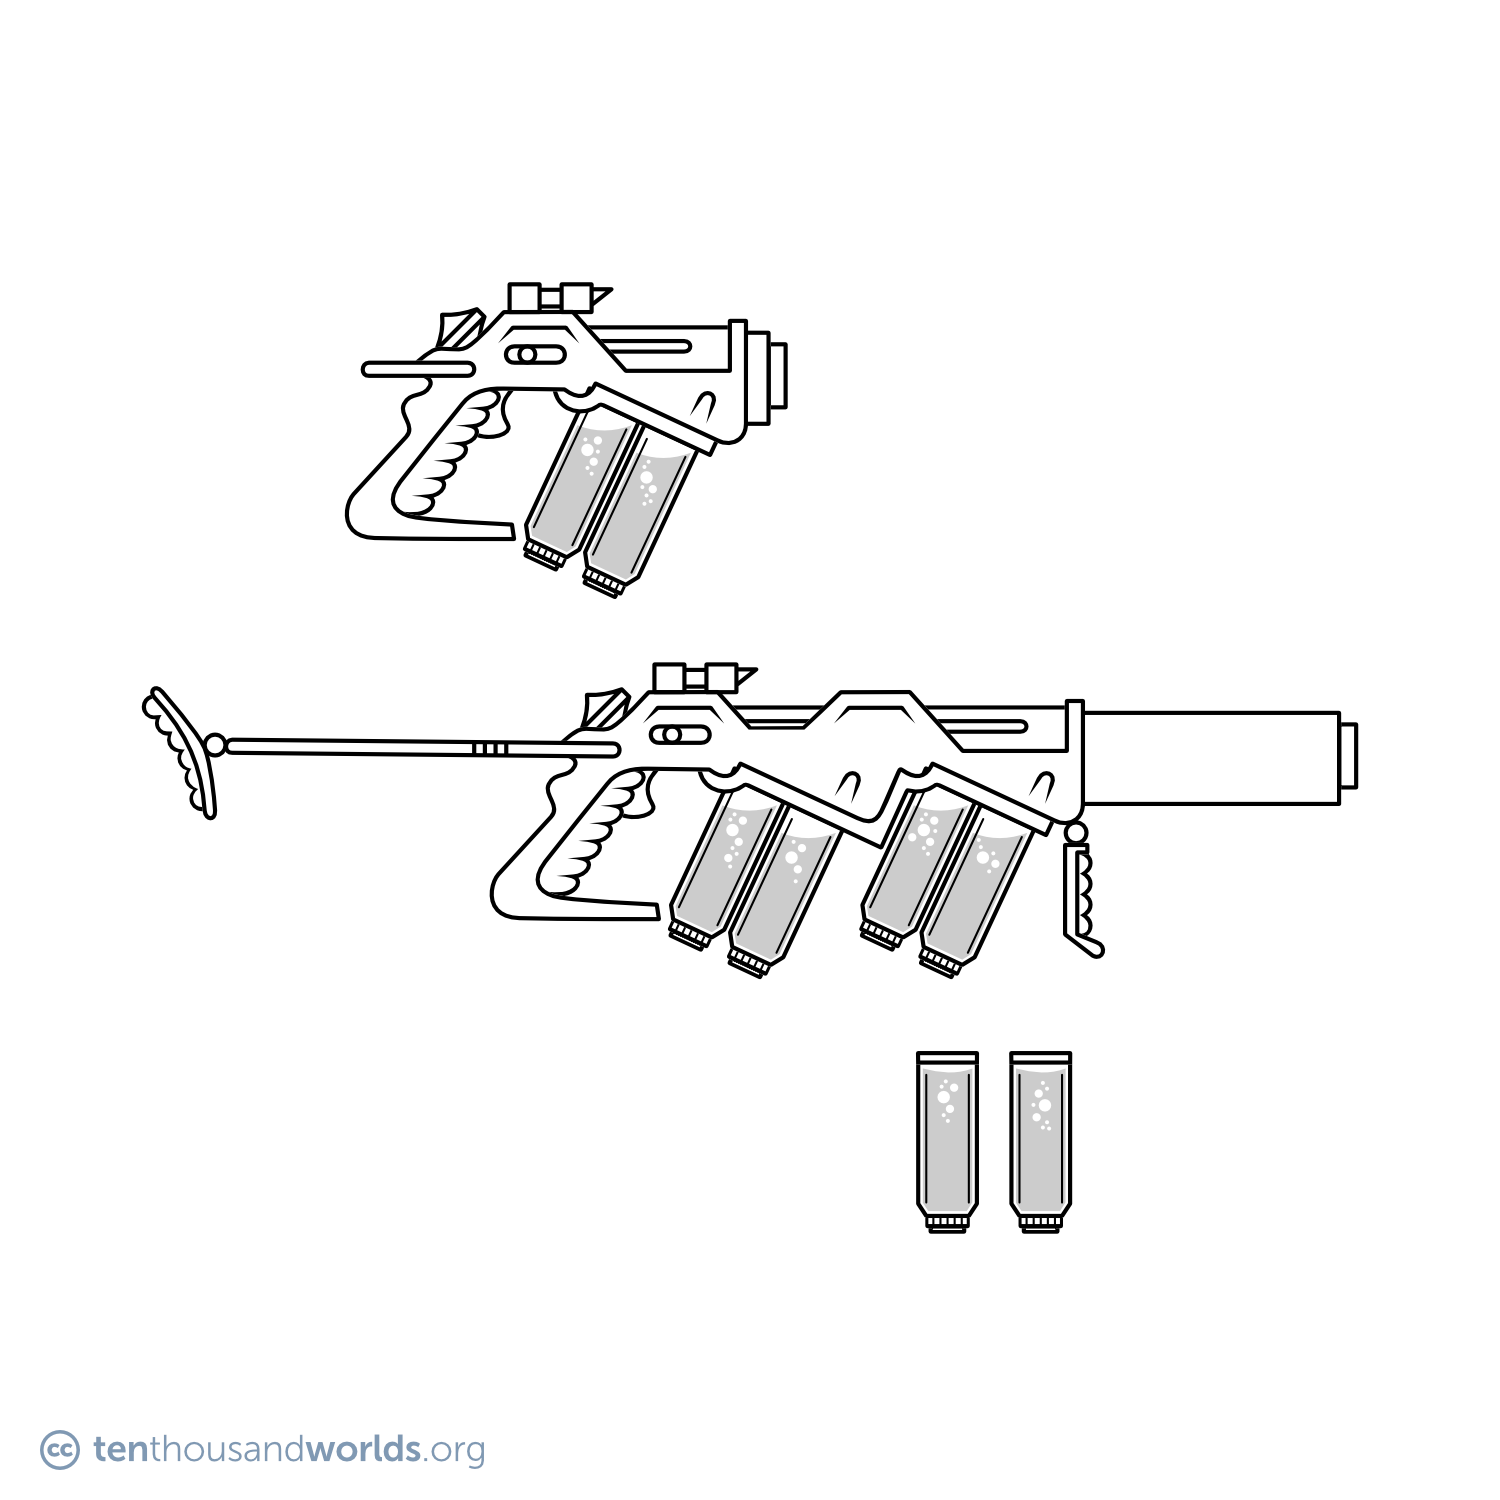 An ink outline of a futuristic stubby pistol and a longer rifle of a similar design, both of which use vials of gel and liquid as their ammunition and its payload. Two replacement vials stand upright nearby.